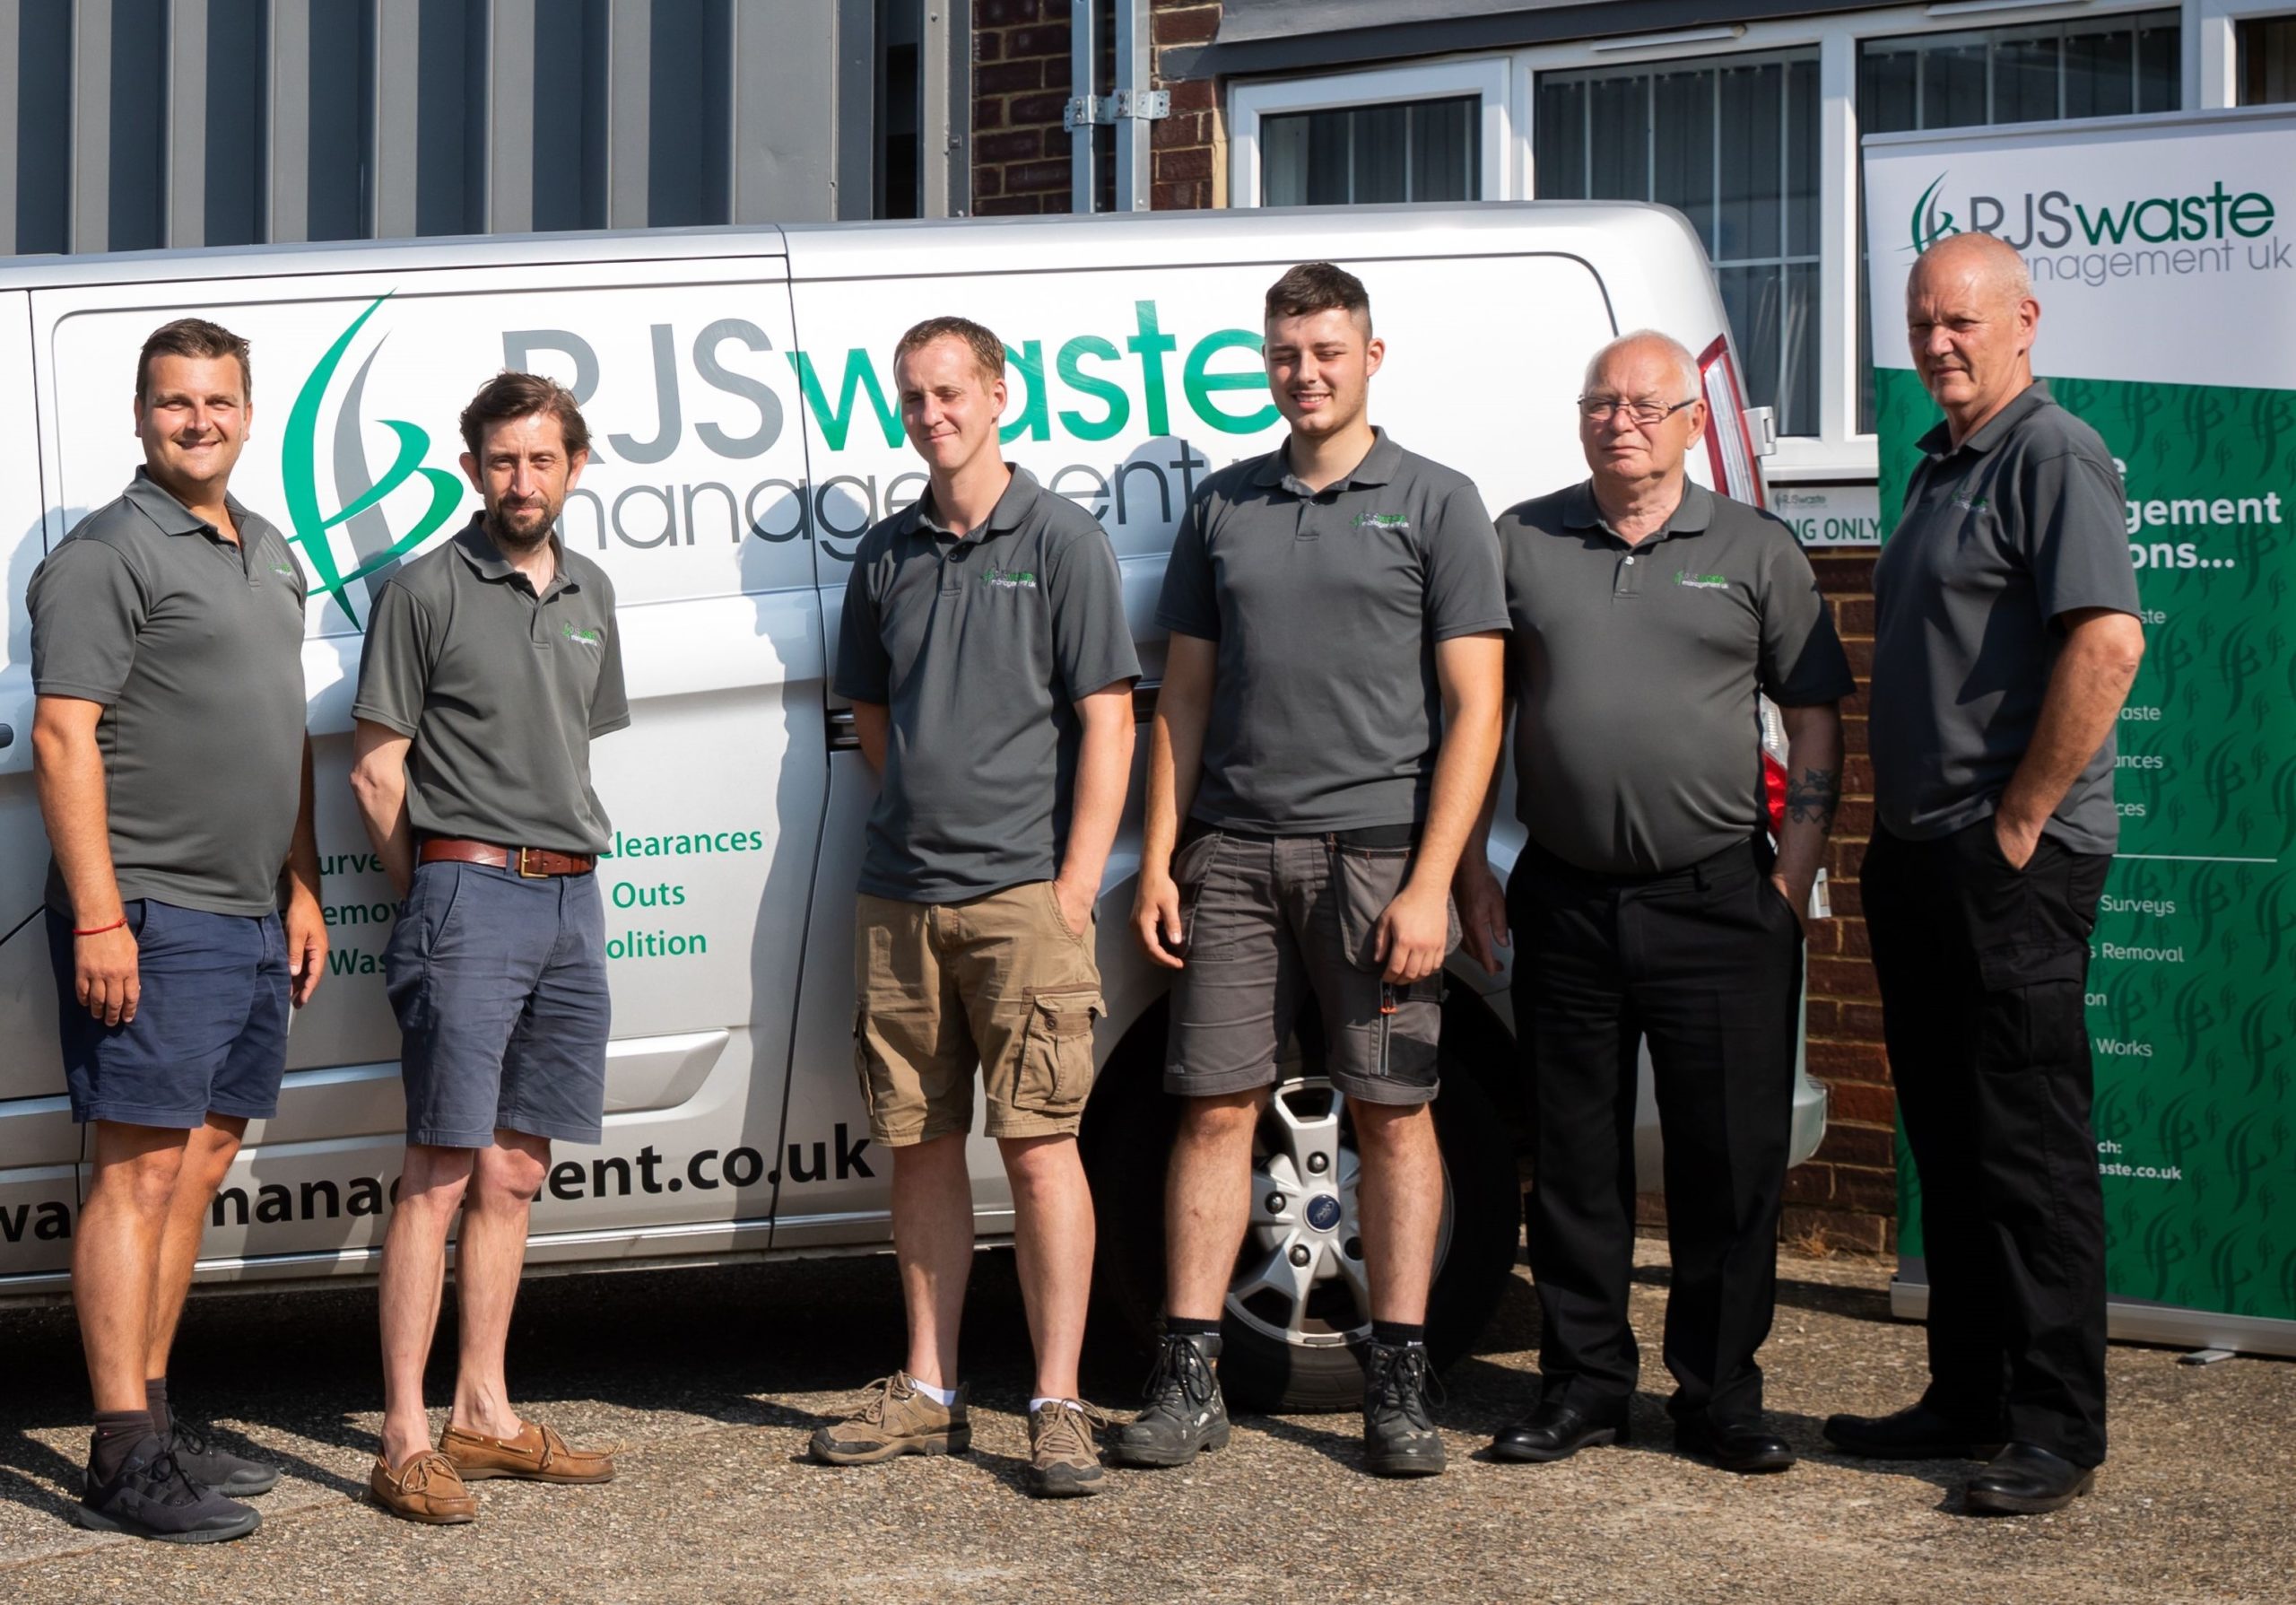 RJS Waste Management team standing in front of company van